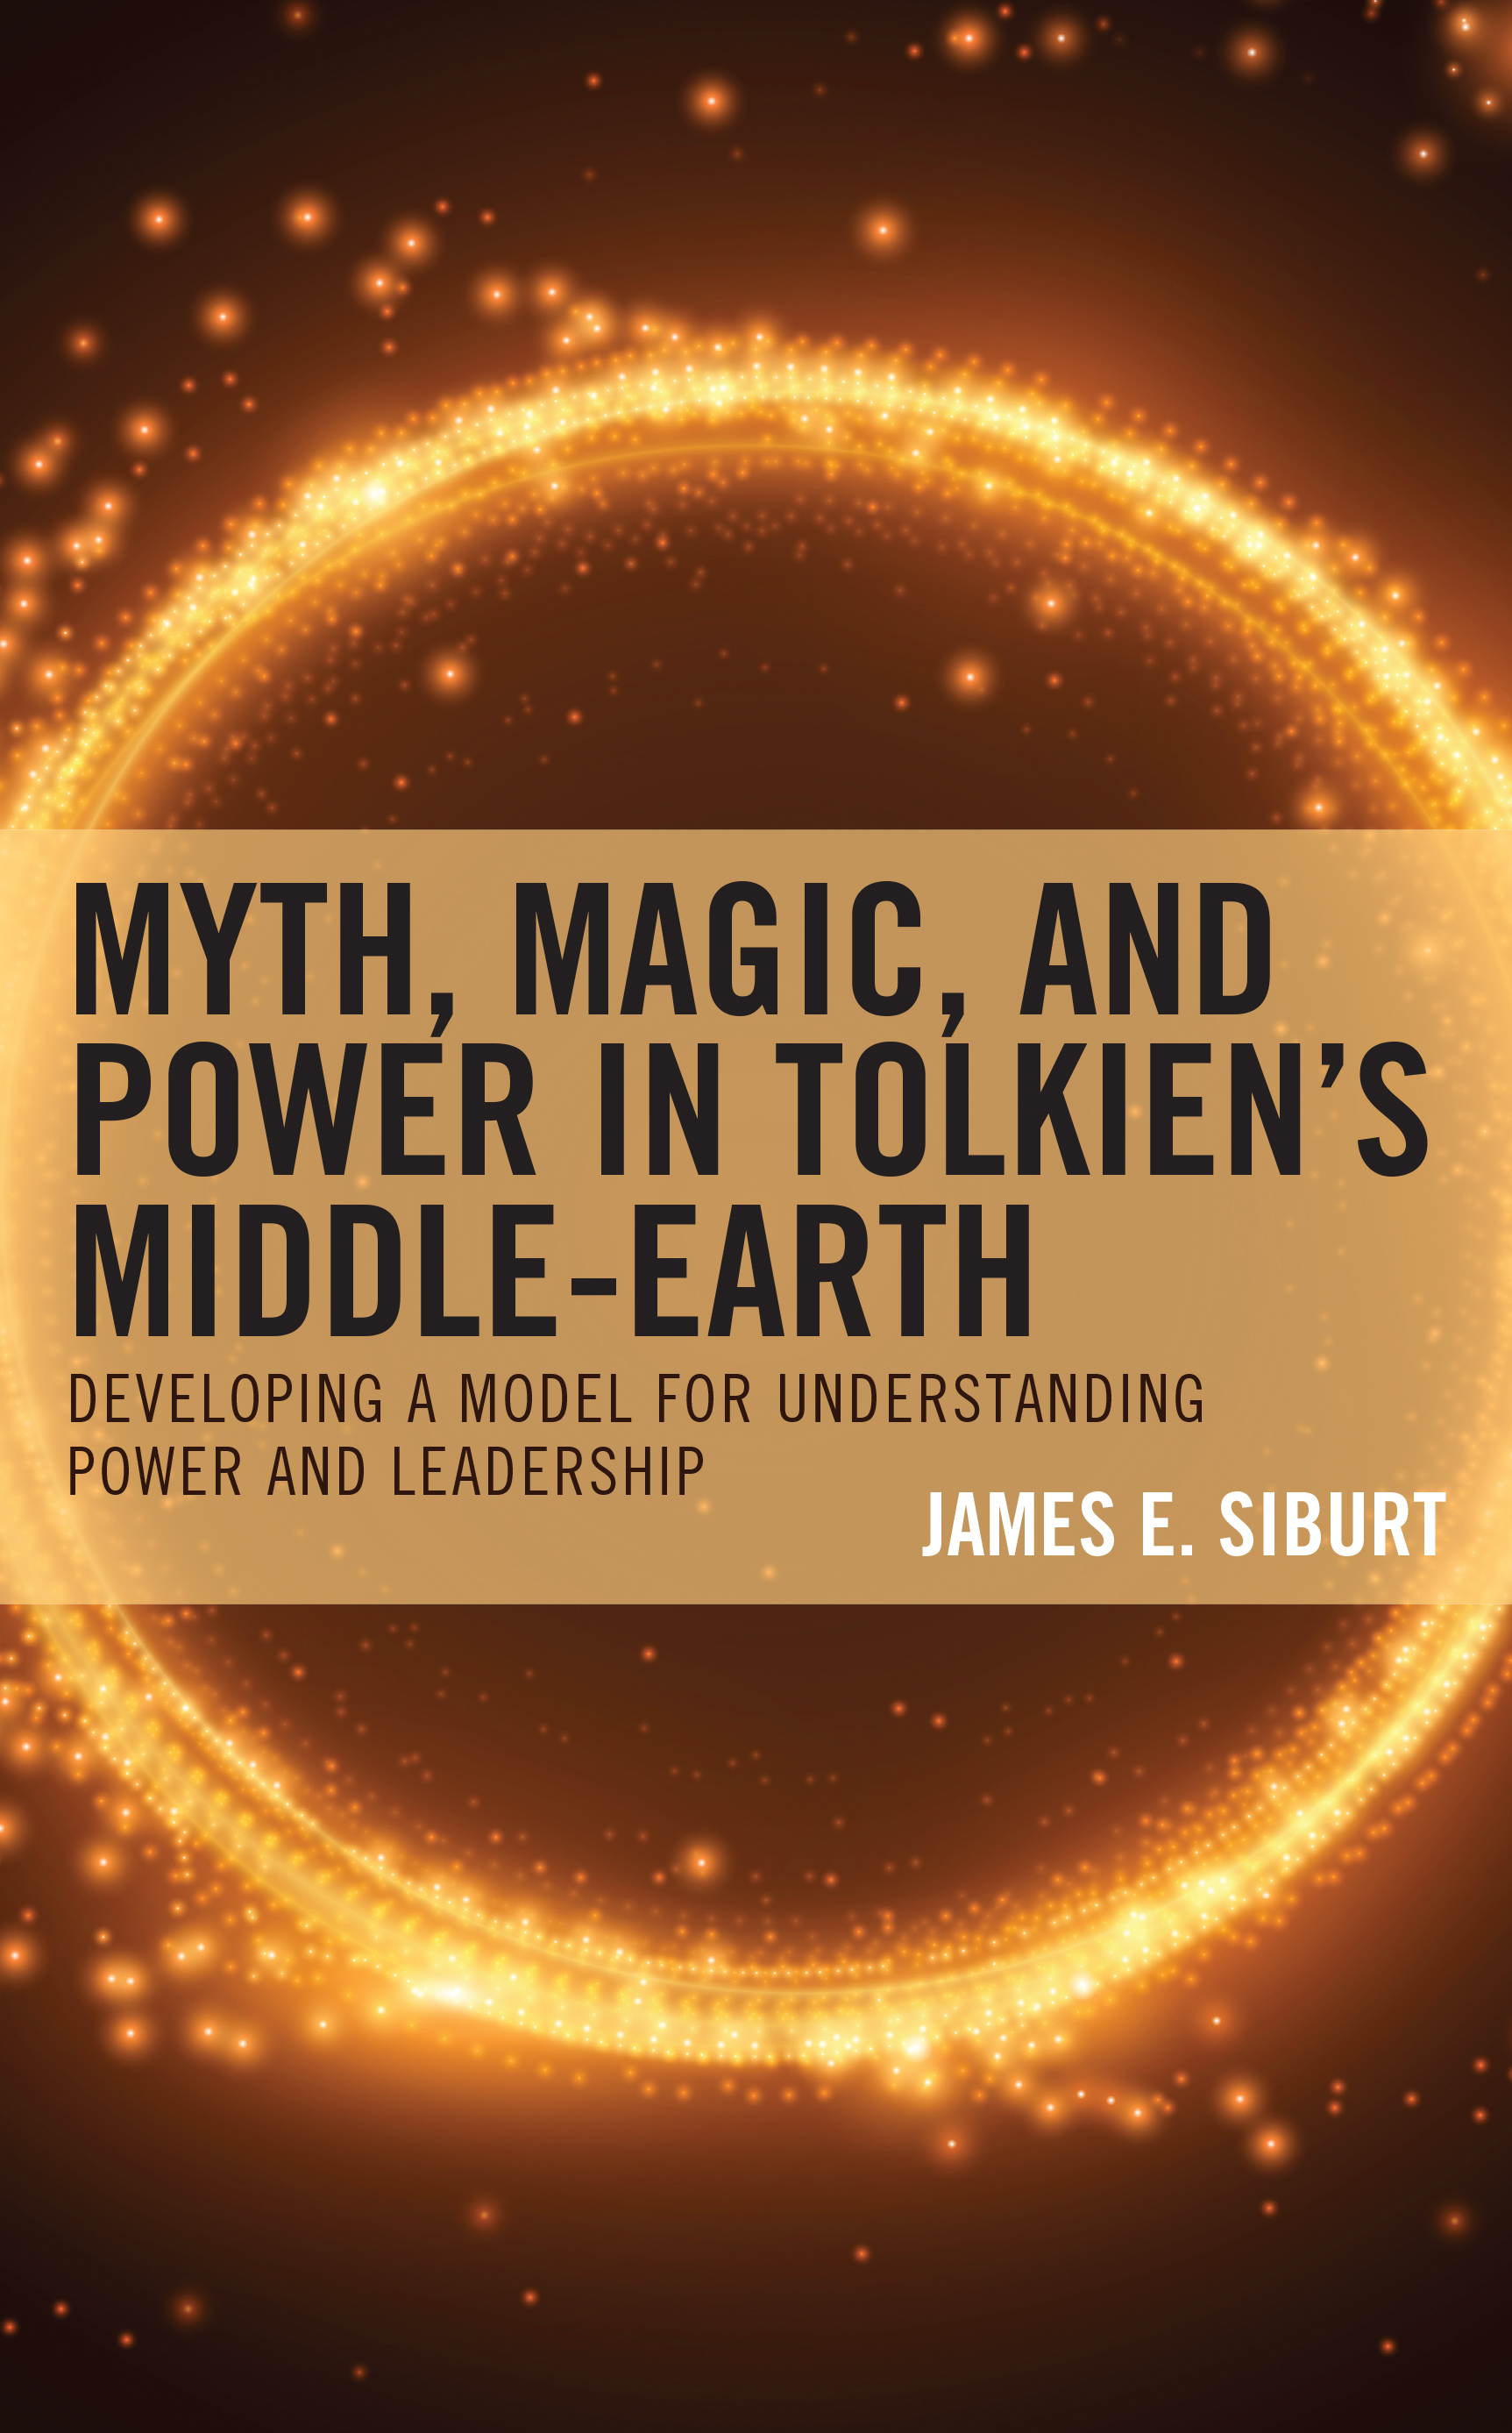 Myth, Magic, and Power in Tolkien’s Middle-earth: Developing a Model for Understanding Power and Leadership